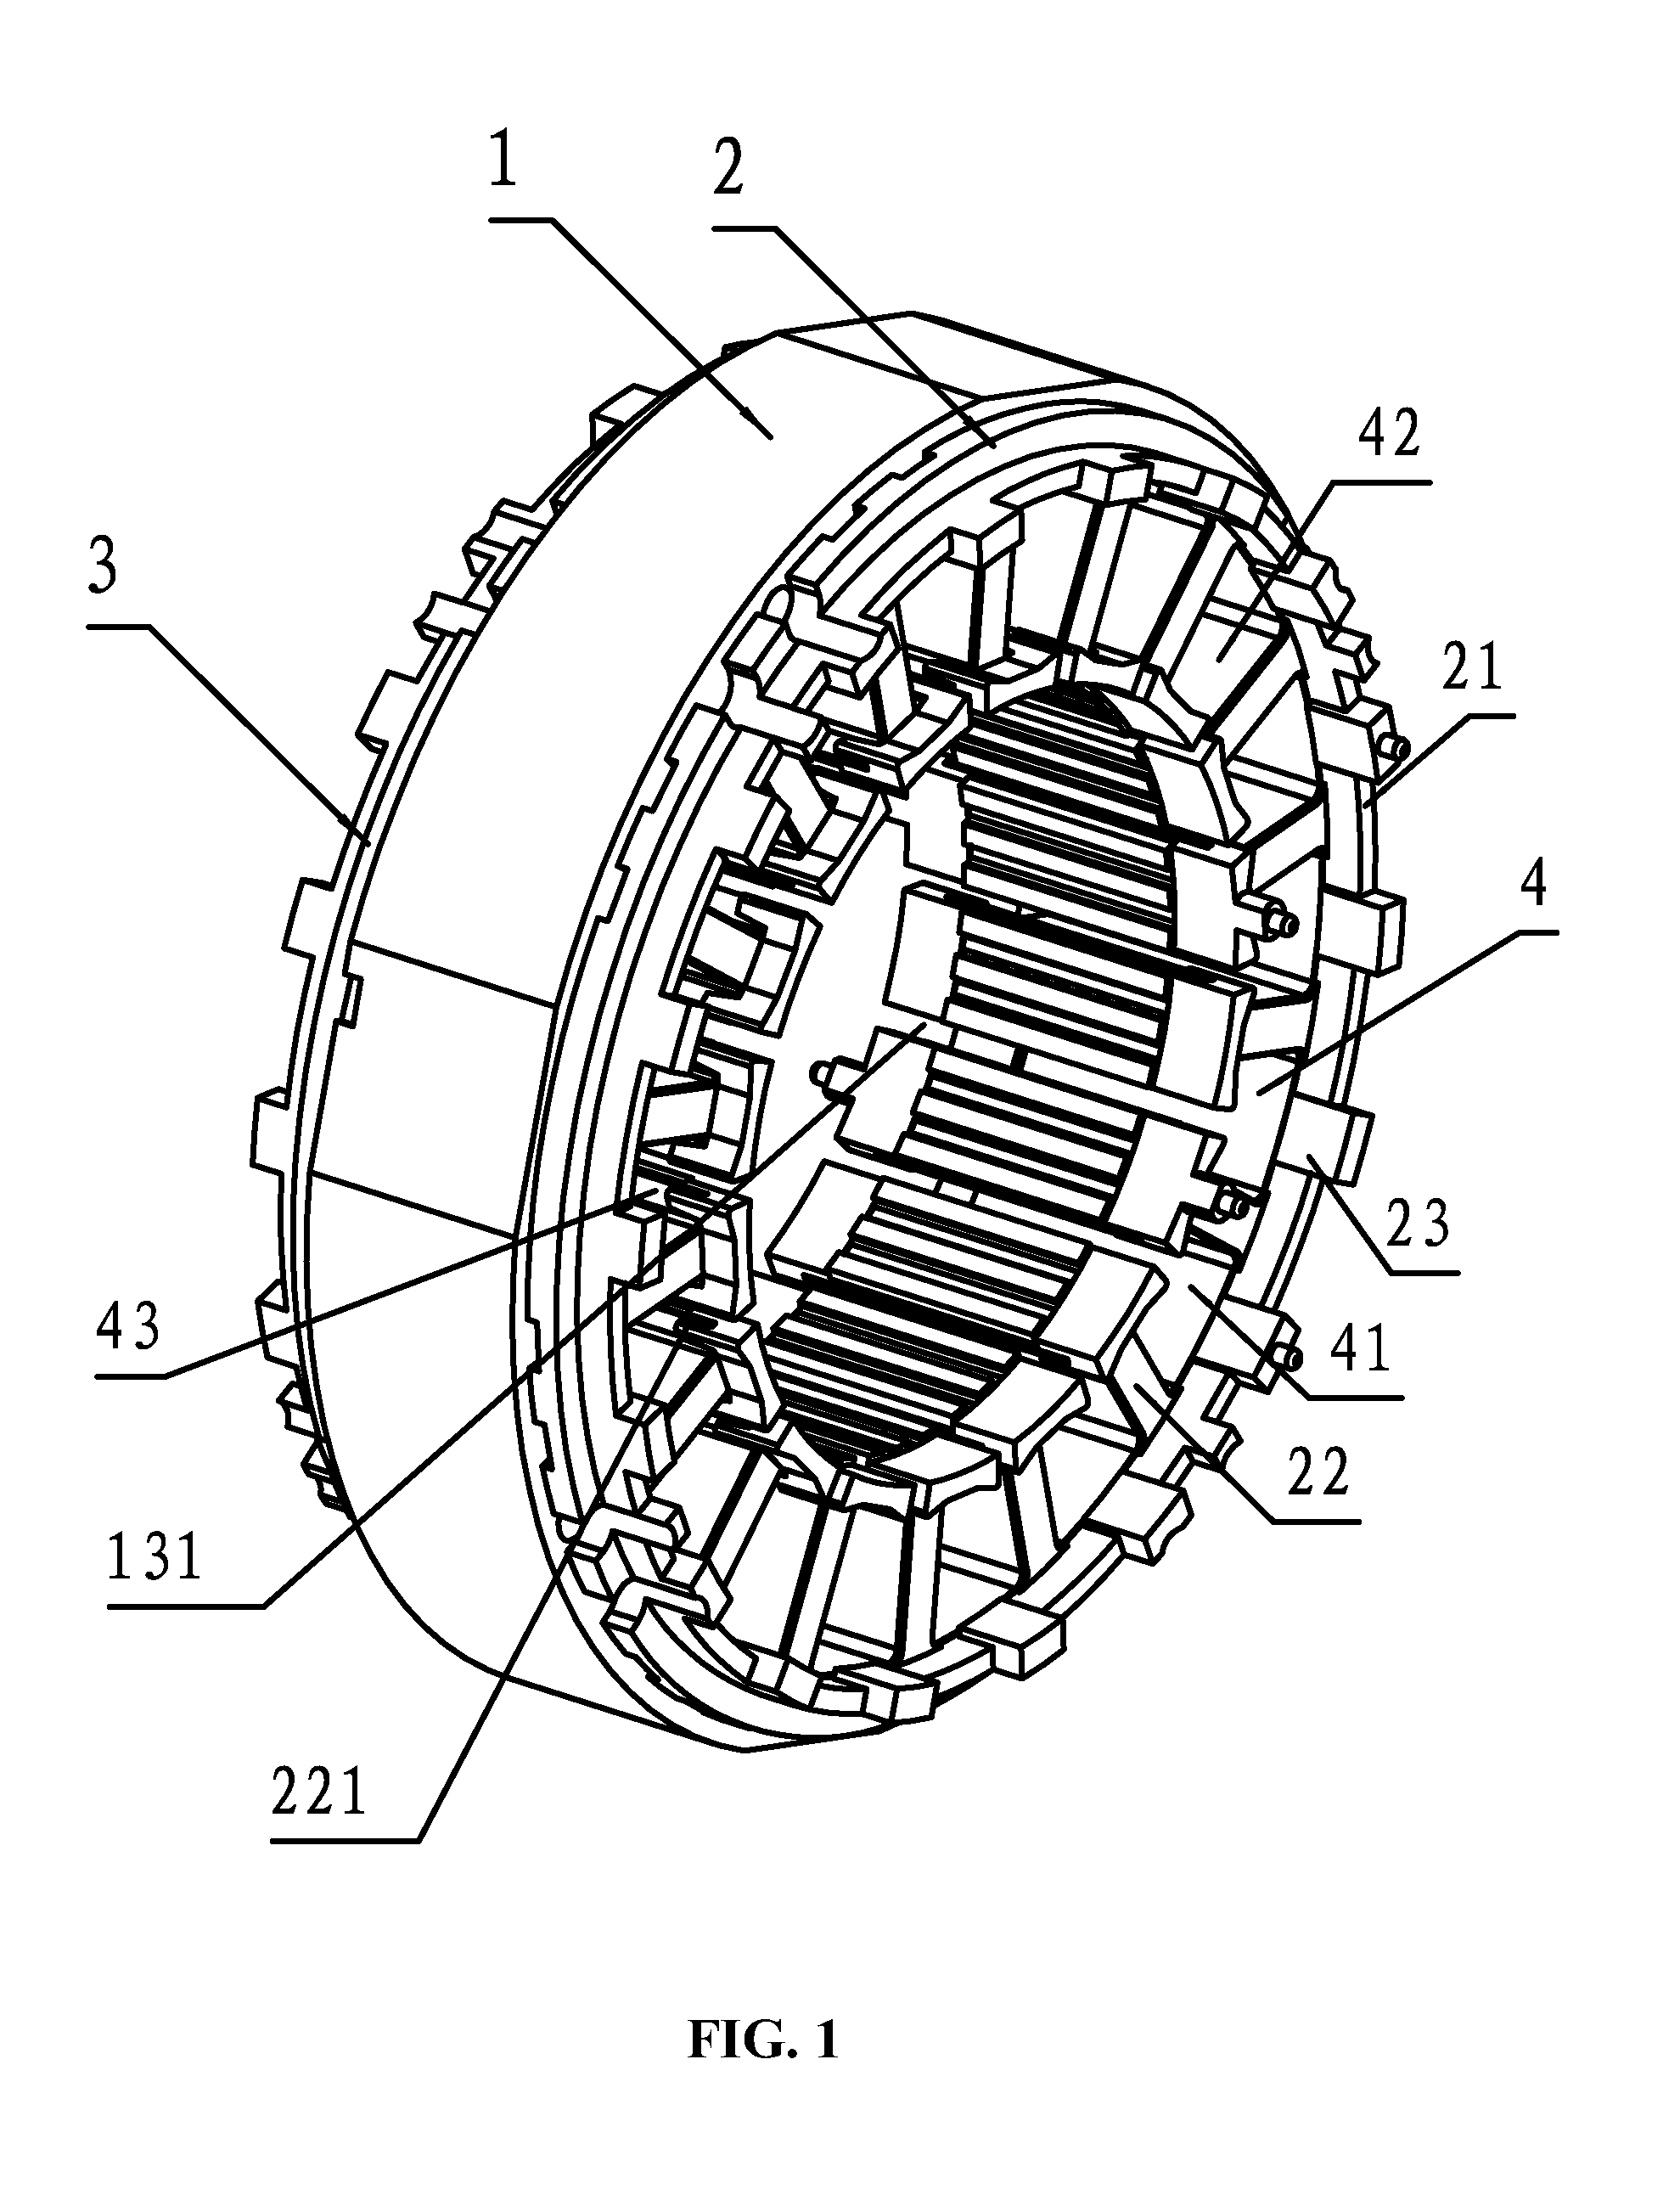 Mounting structure for slot paper in a motor stator